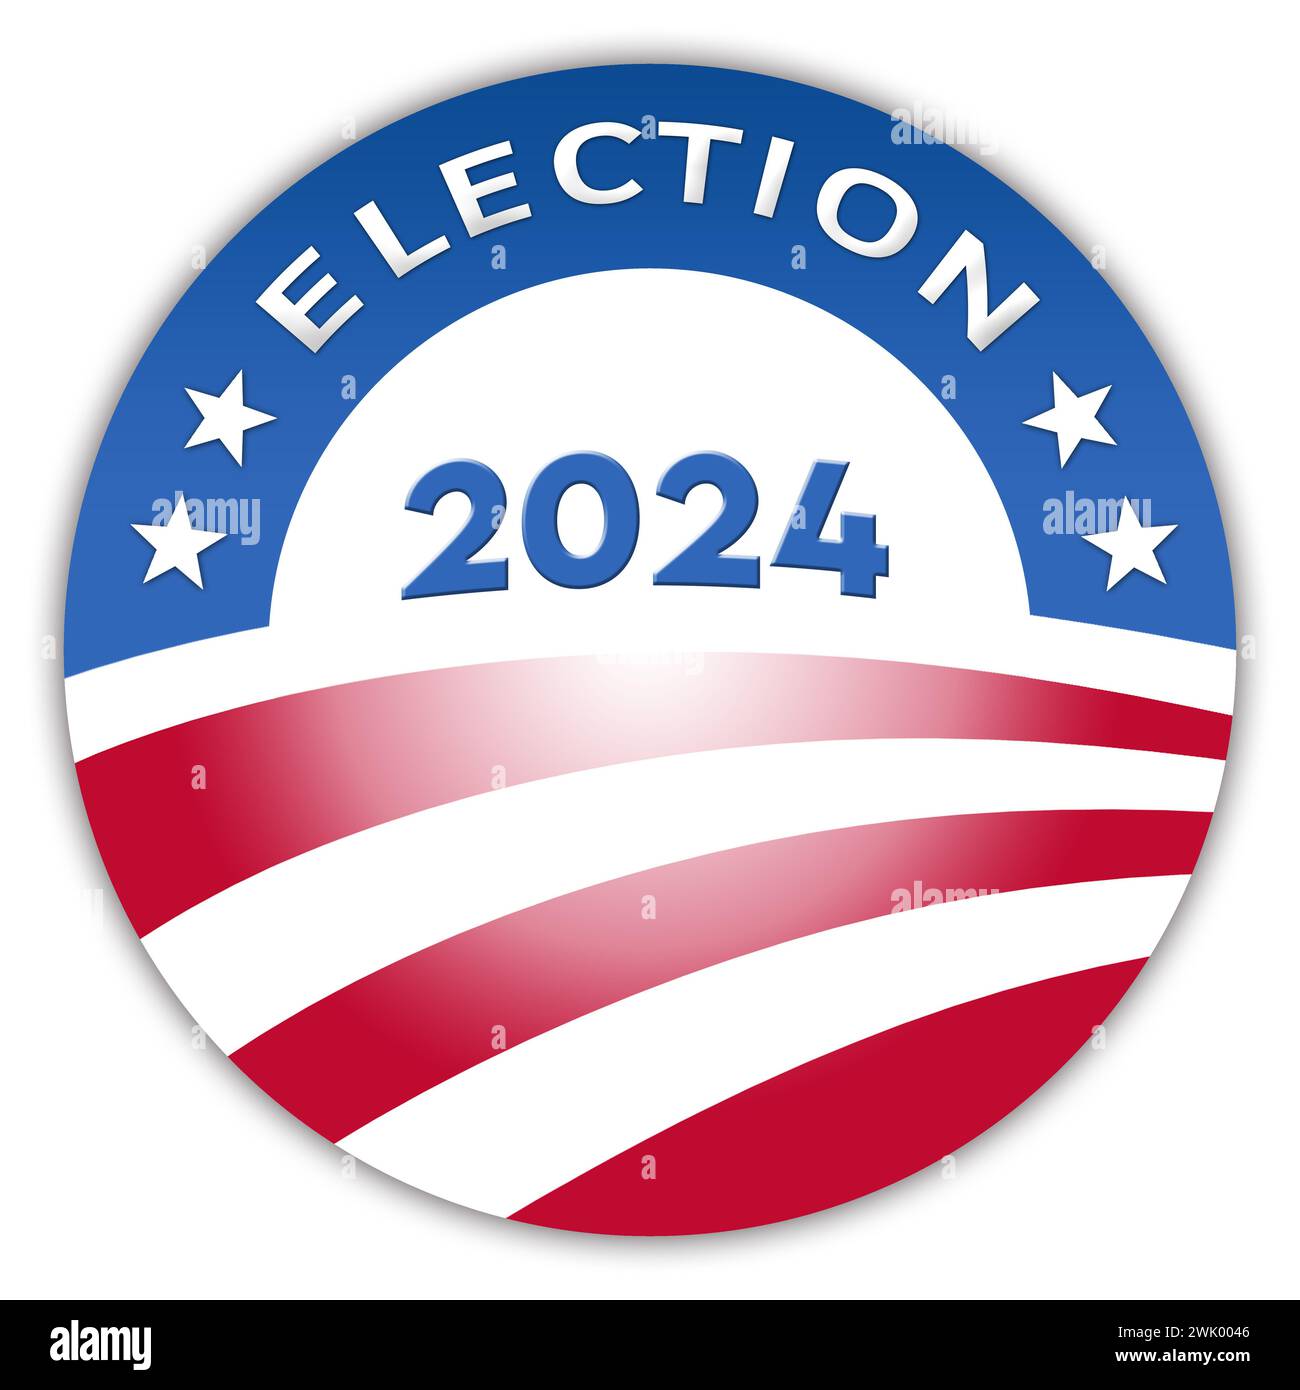 Election 2024 - Vote for President Stock Photo